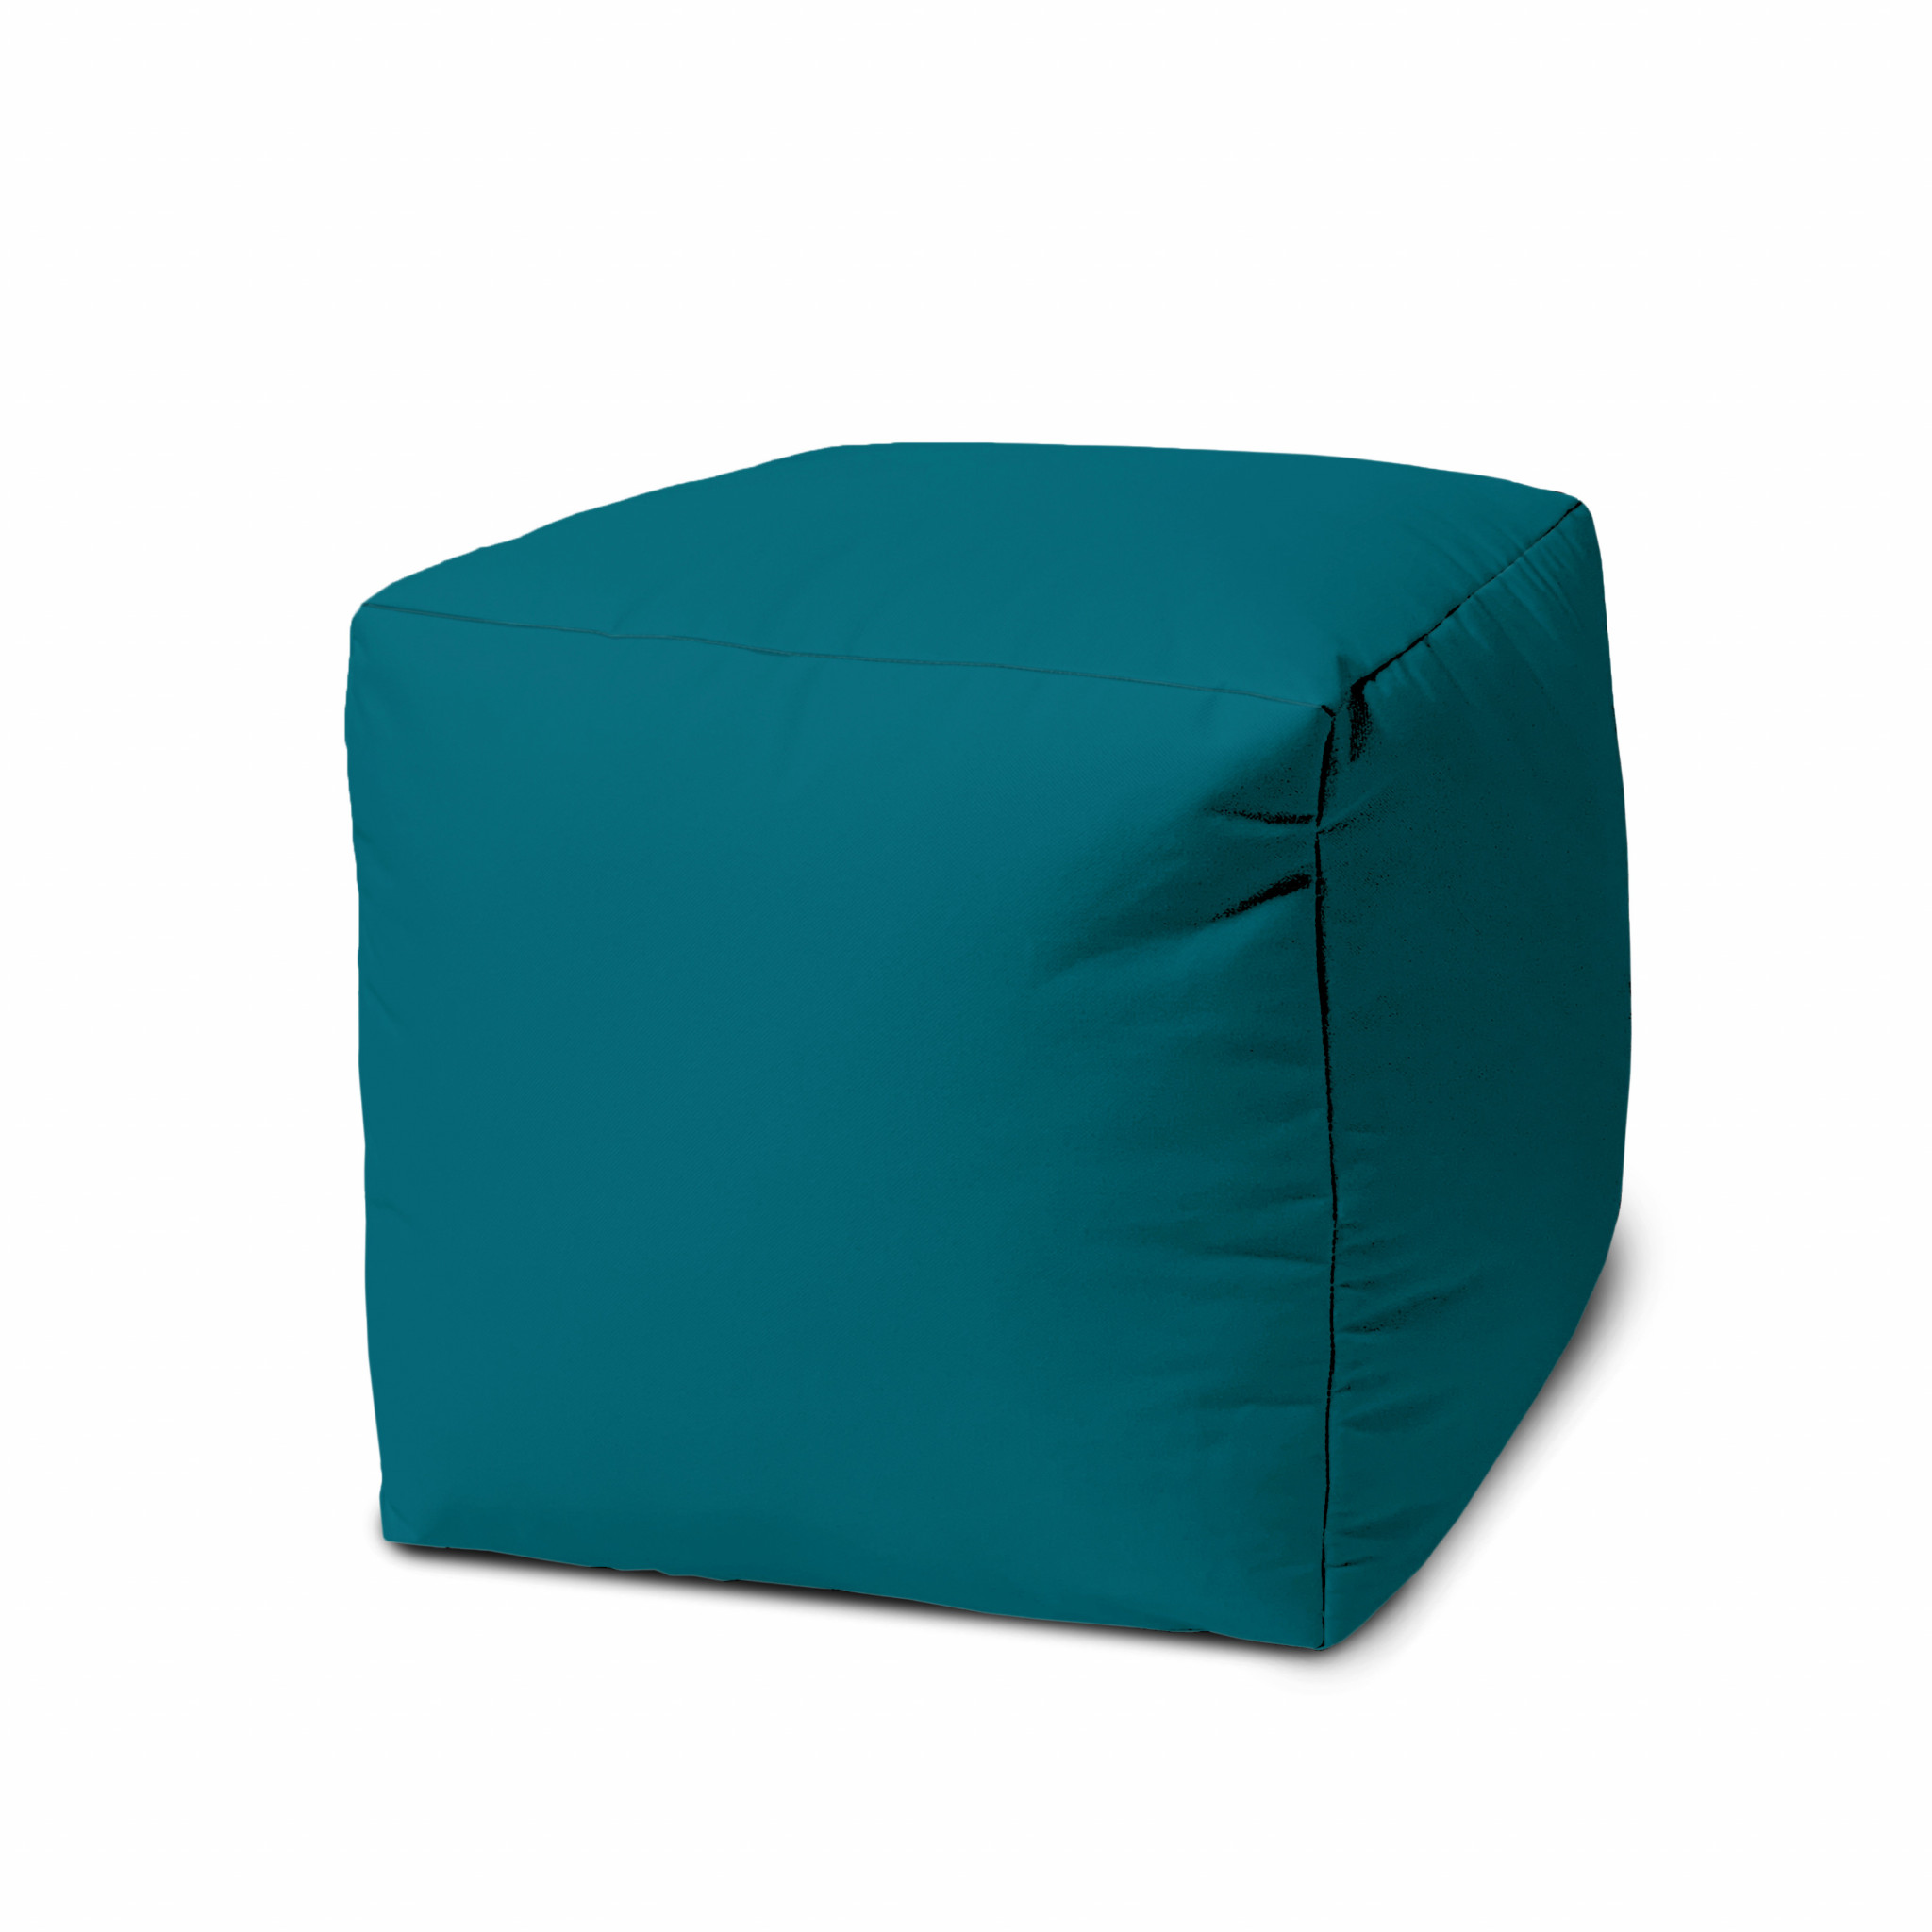 17" Cool Dark Teal Solid Color Indoor Outdoor Pouf Ottoman-474151-1